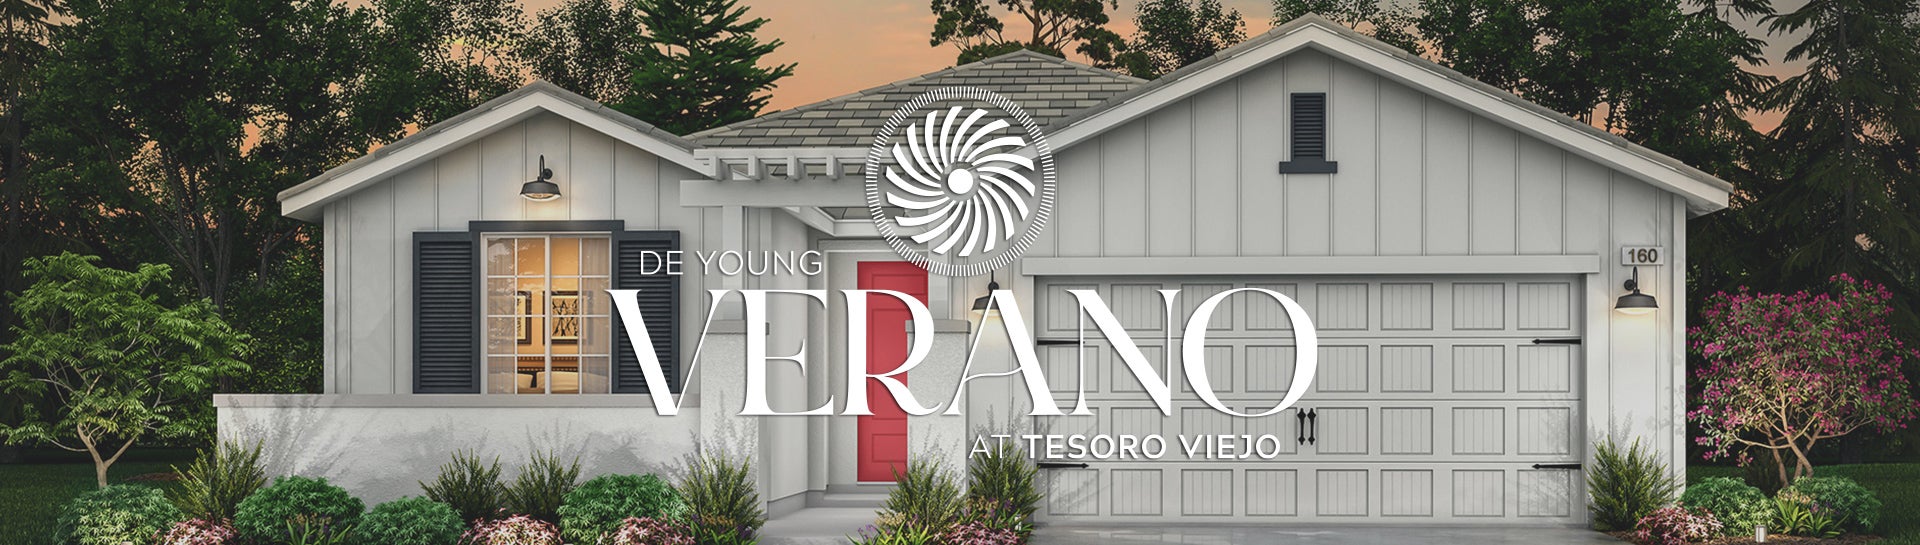 Join Us Saturday, August 28, For A De Young Verano Pre-Grand Opening!